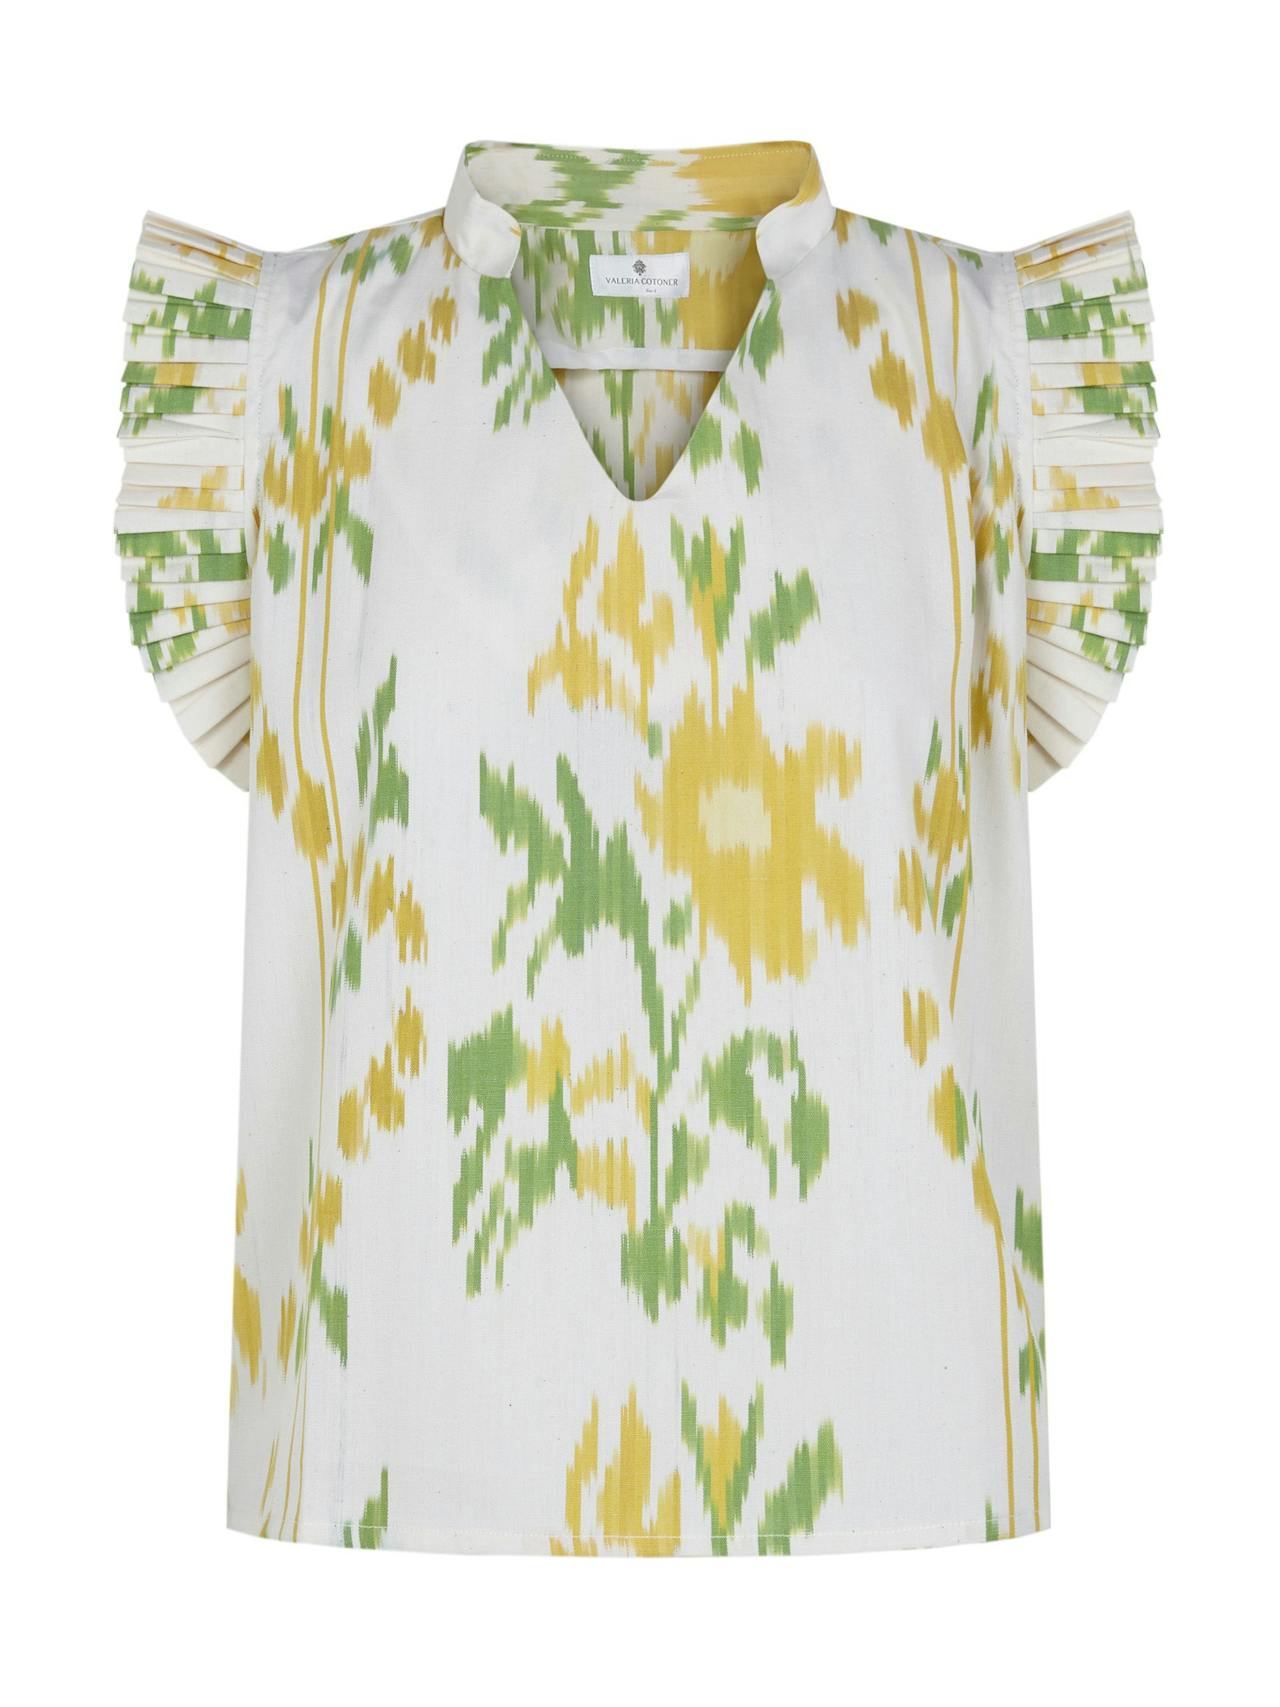 White, yellow and green Ikat cotton blouse